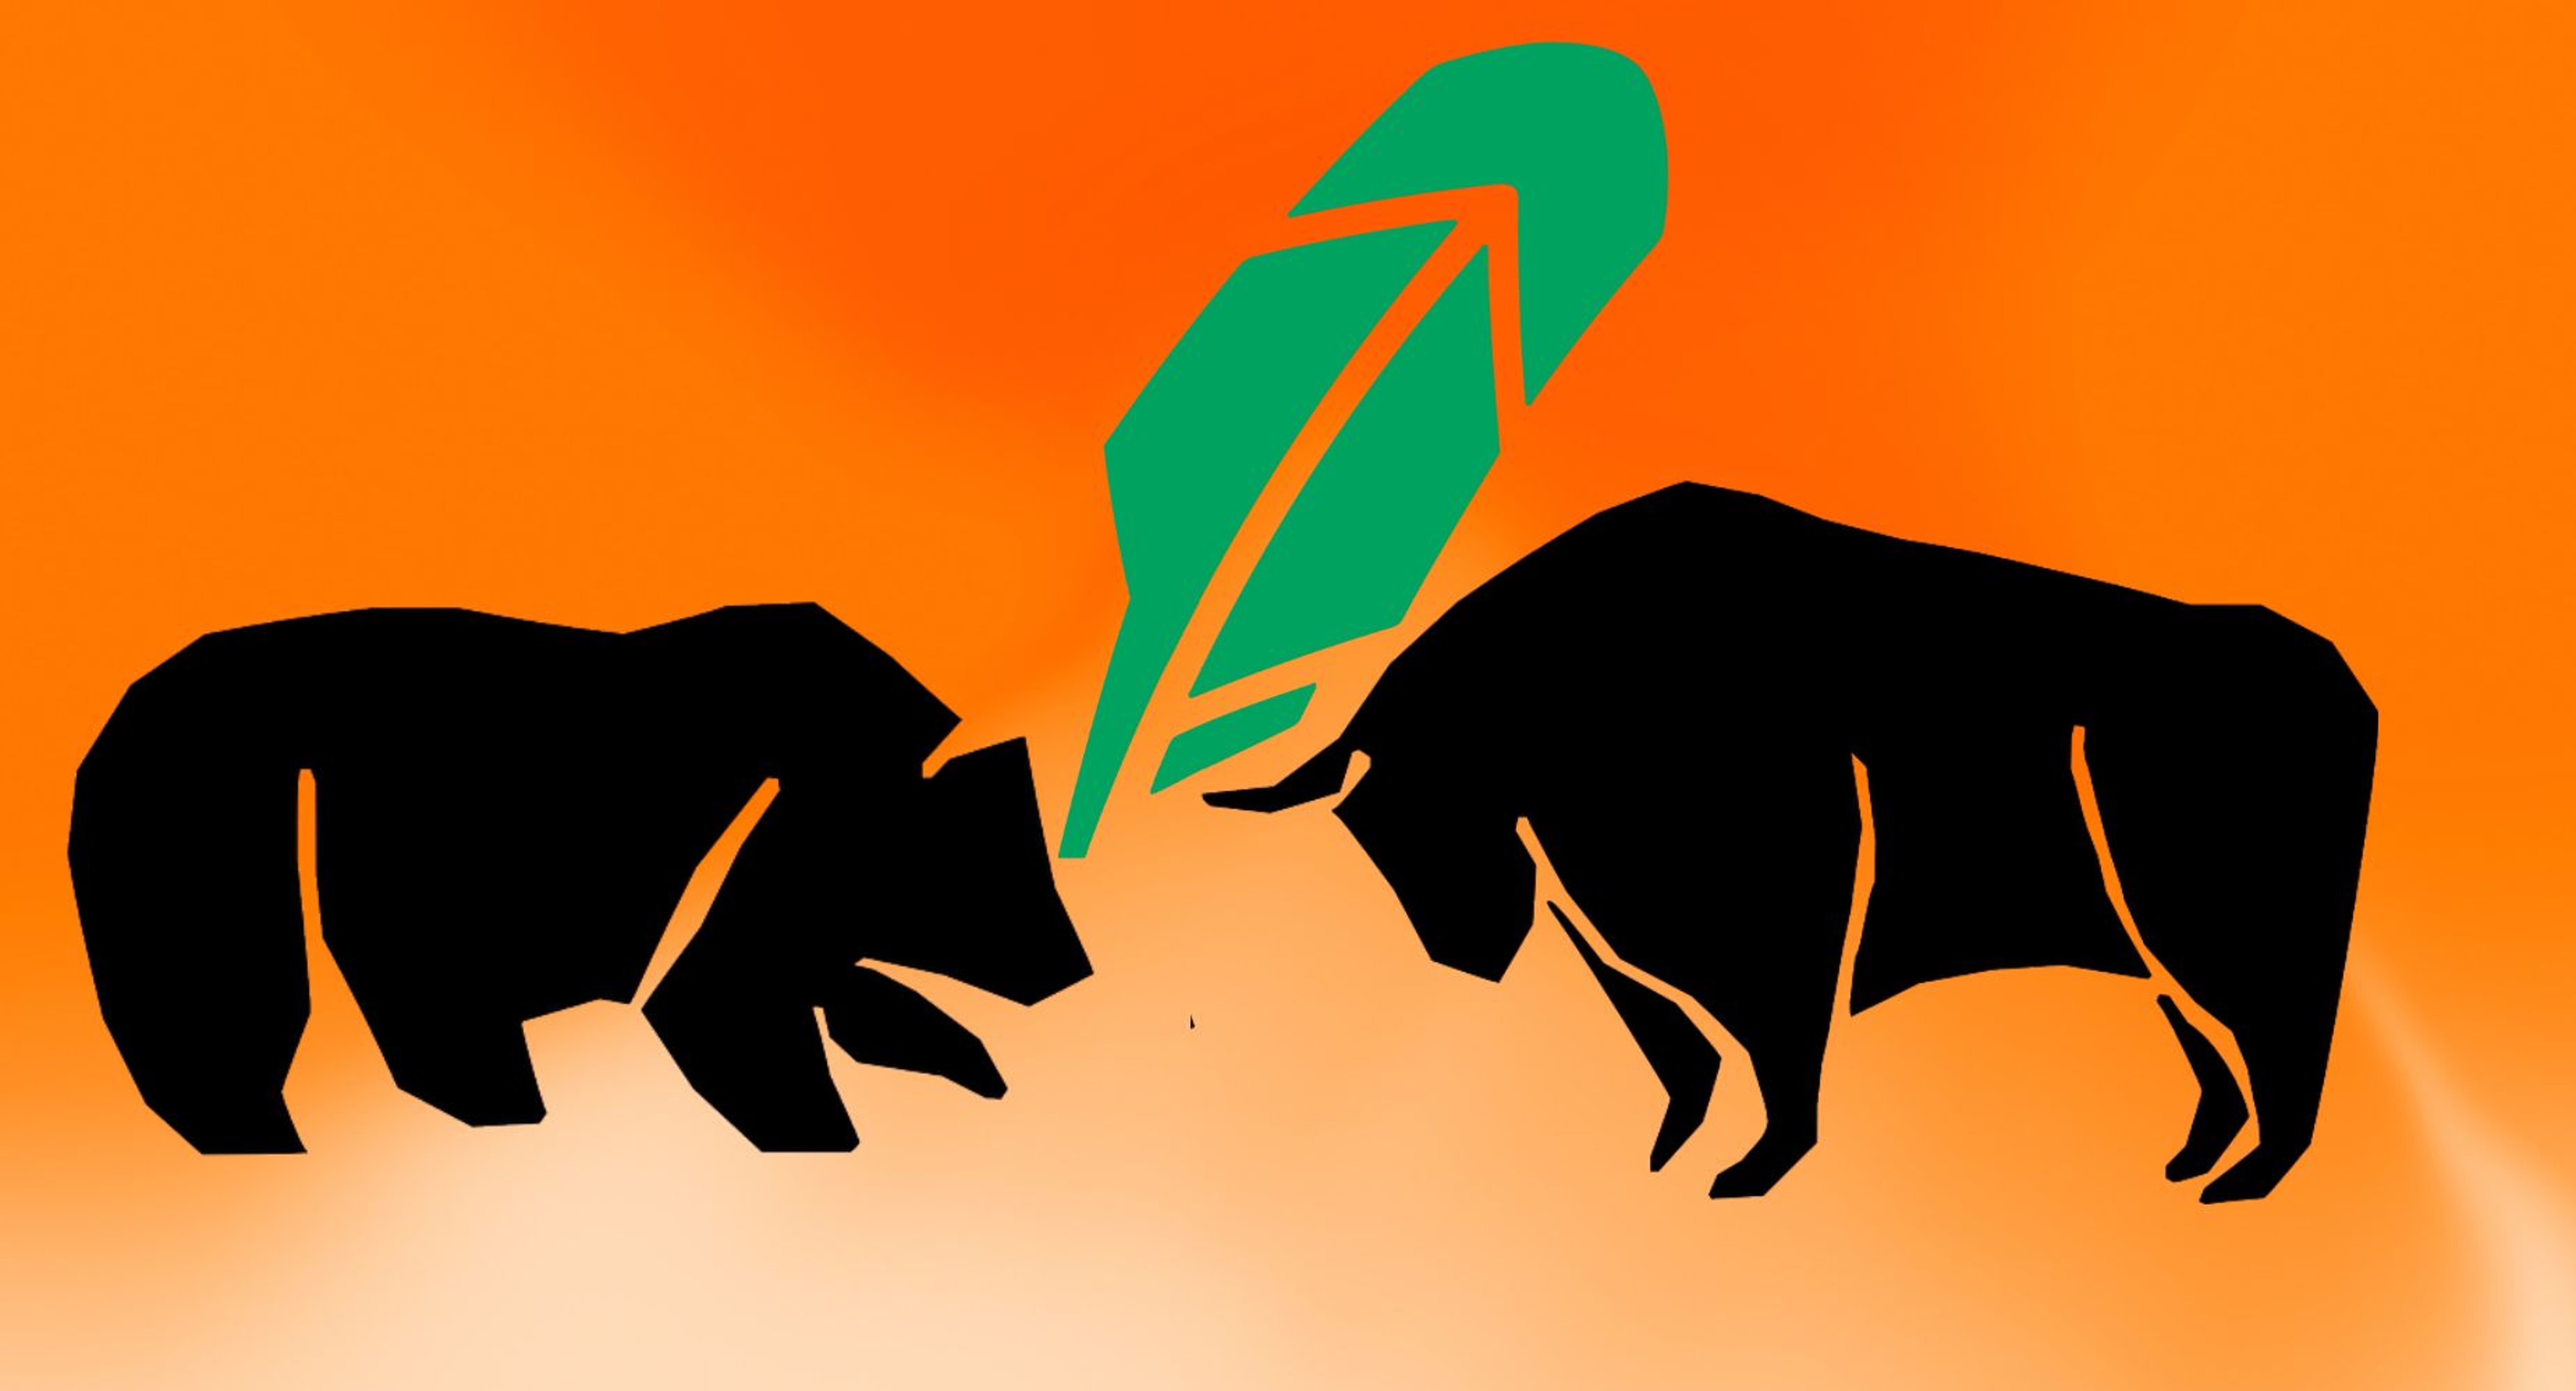 Bears Lick Their Chops Over Robinhood&#39;s Stock, Here&#39;s Where The Bulls Could Step In